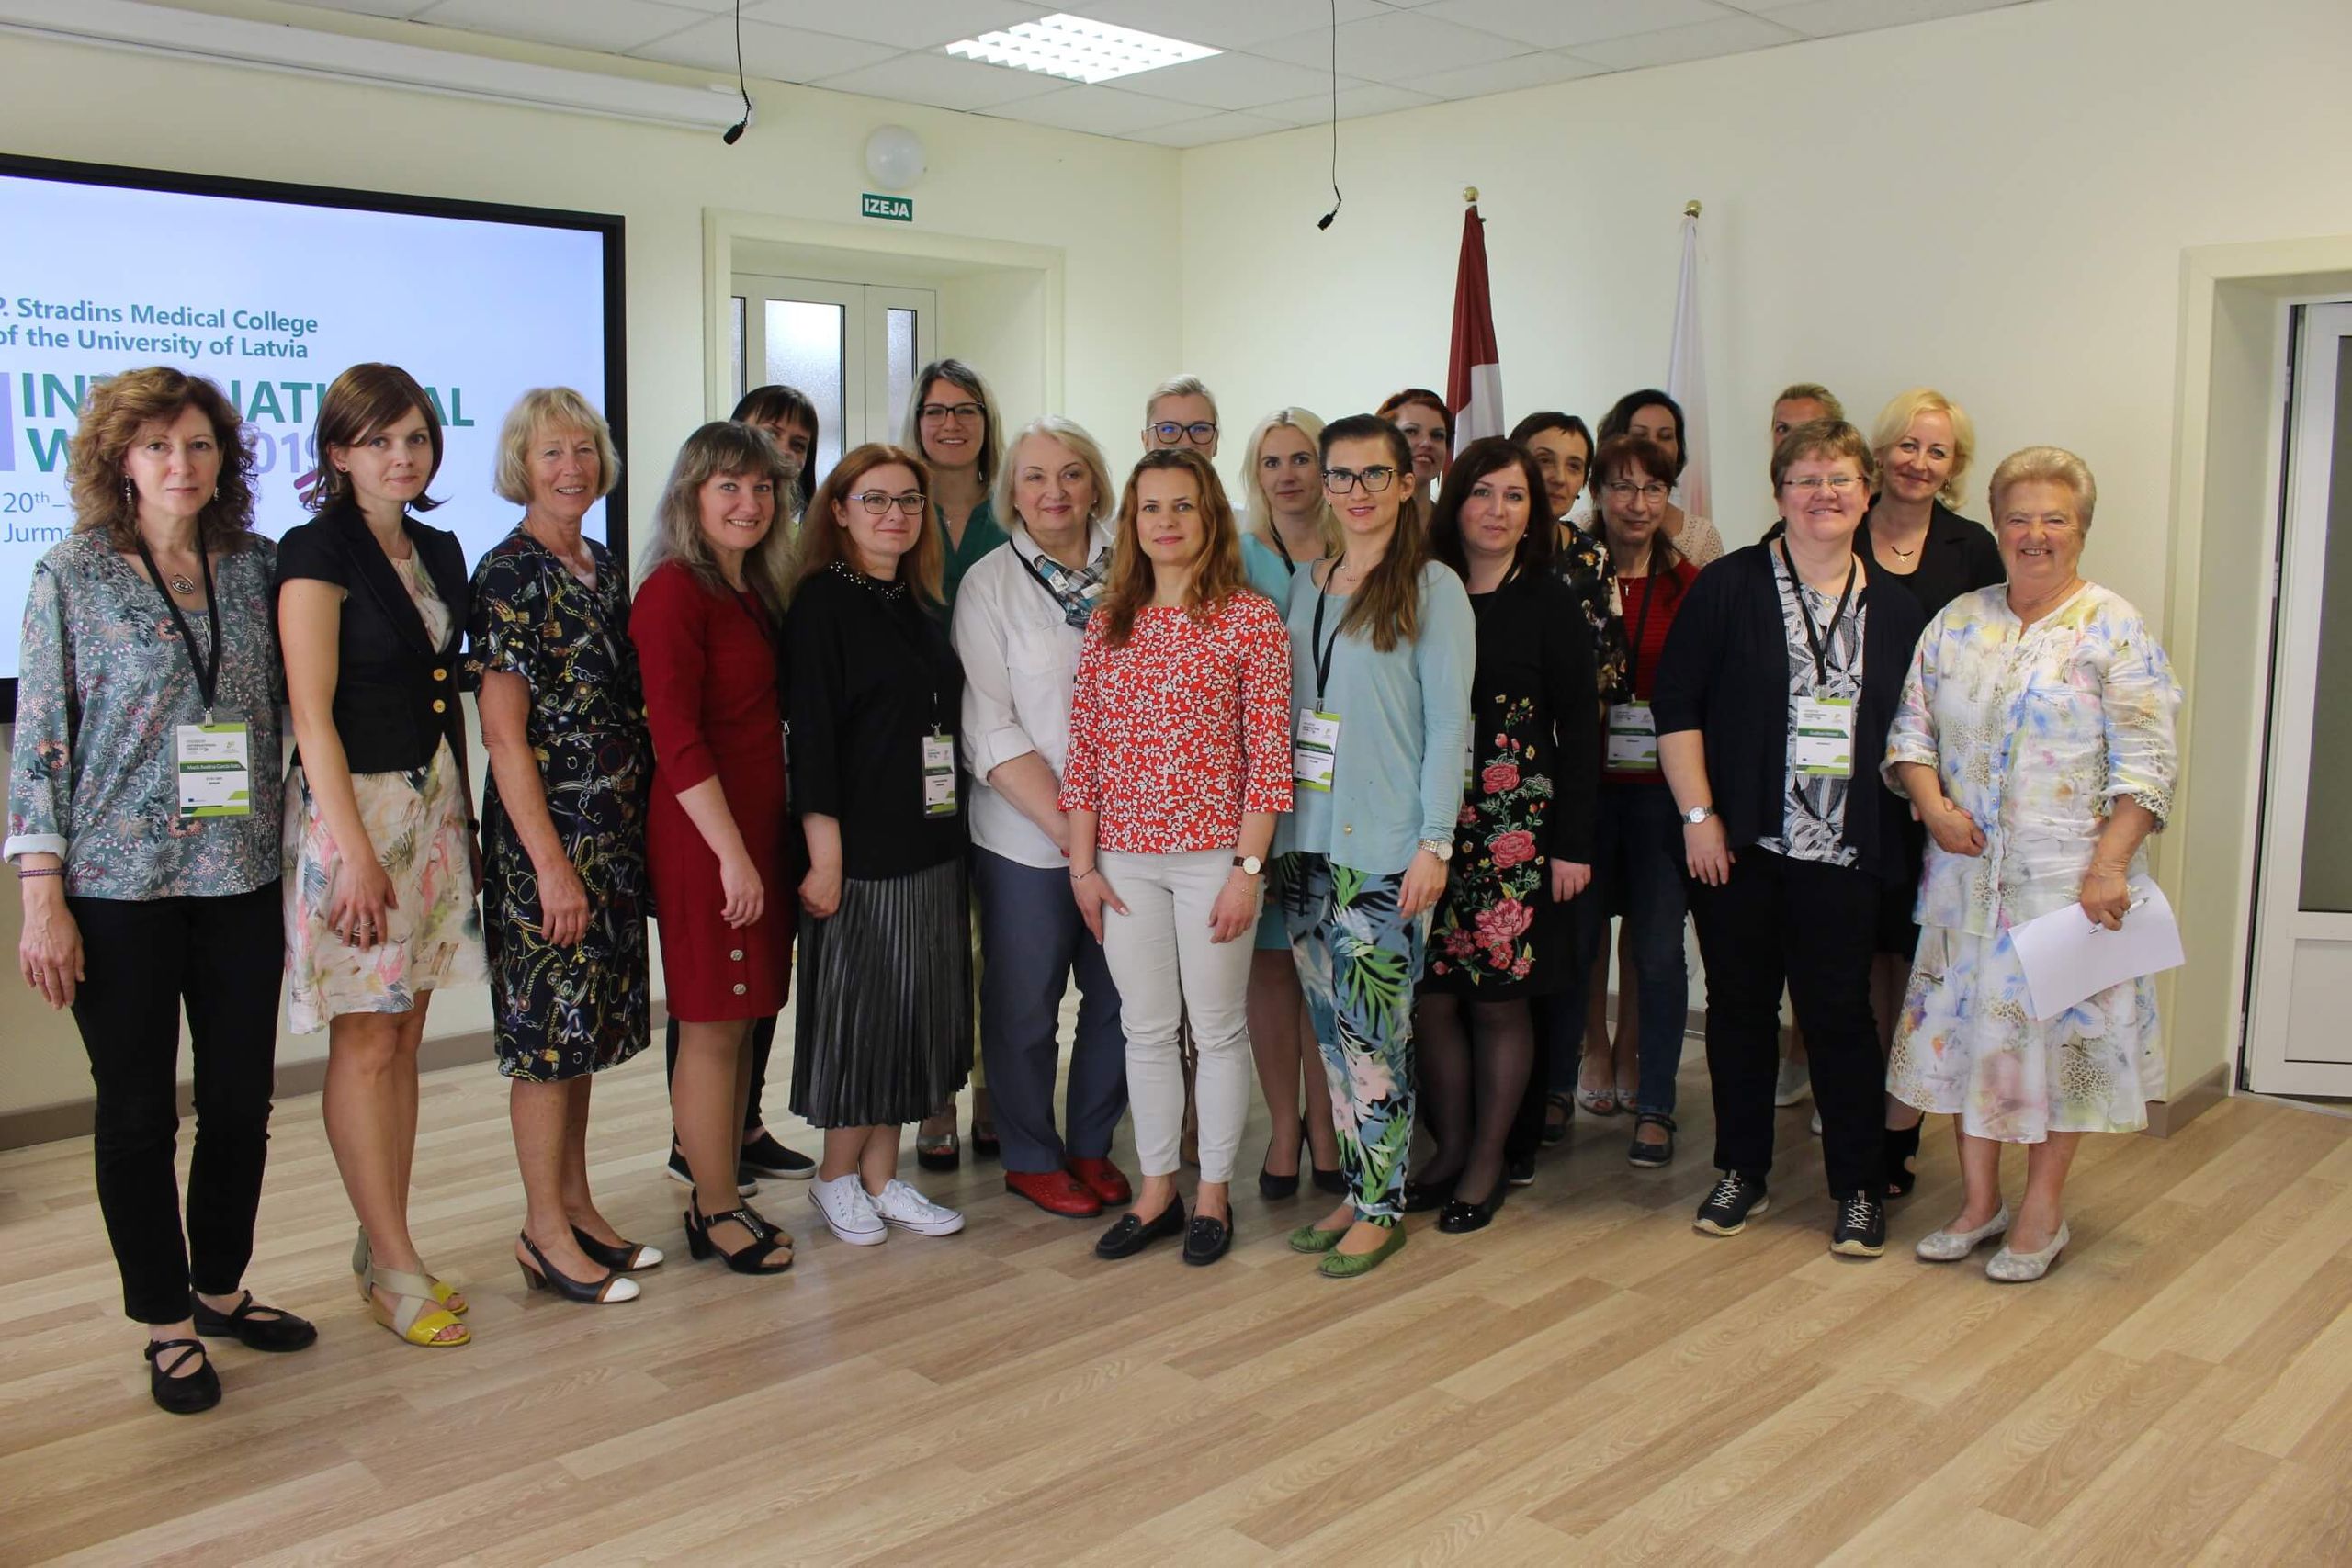 The 2nd International week at P. Stradins Medical College of the University of Latvia 2